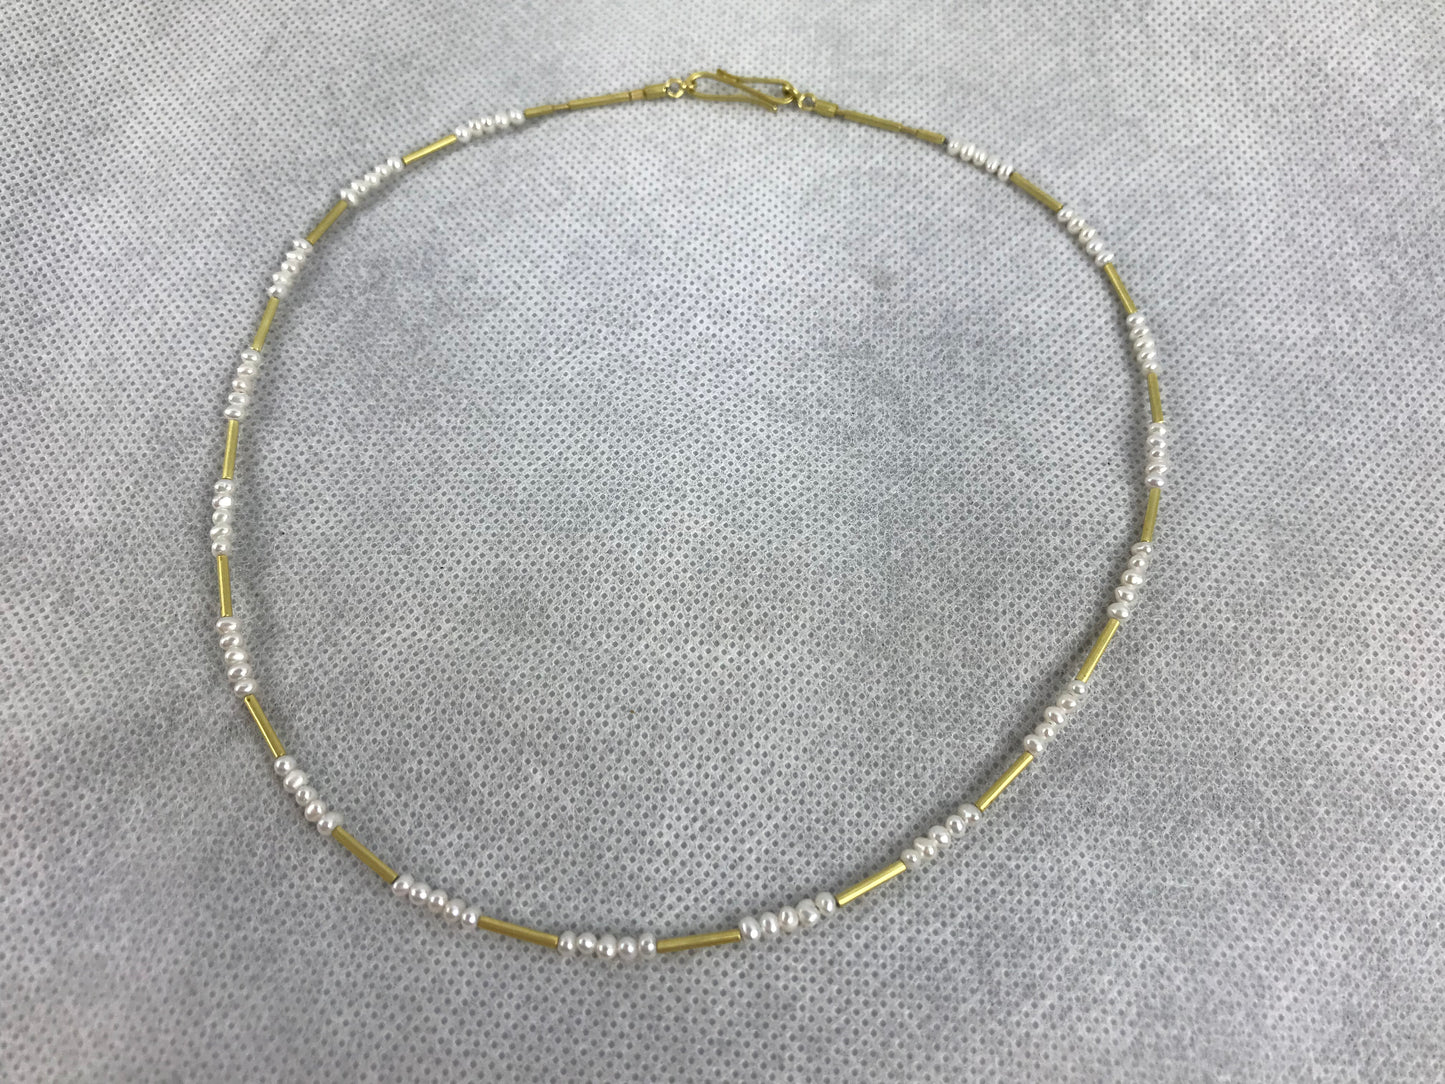 Scott-Moncrieff, Jean: Gold spinels and pearl necklace